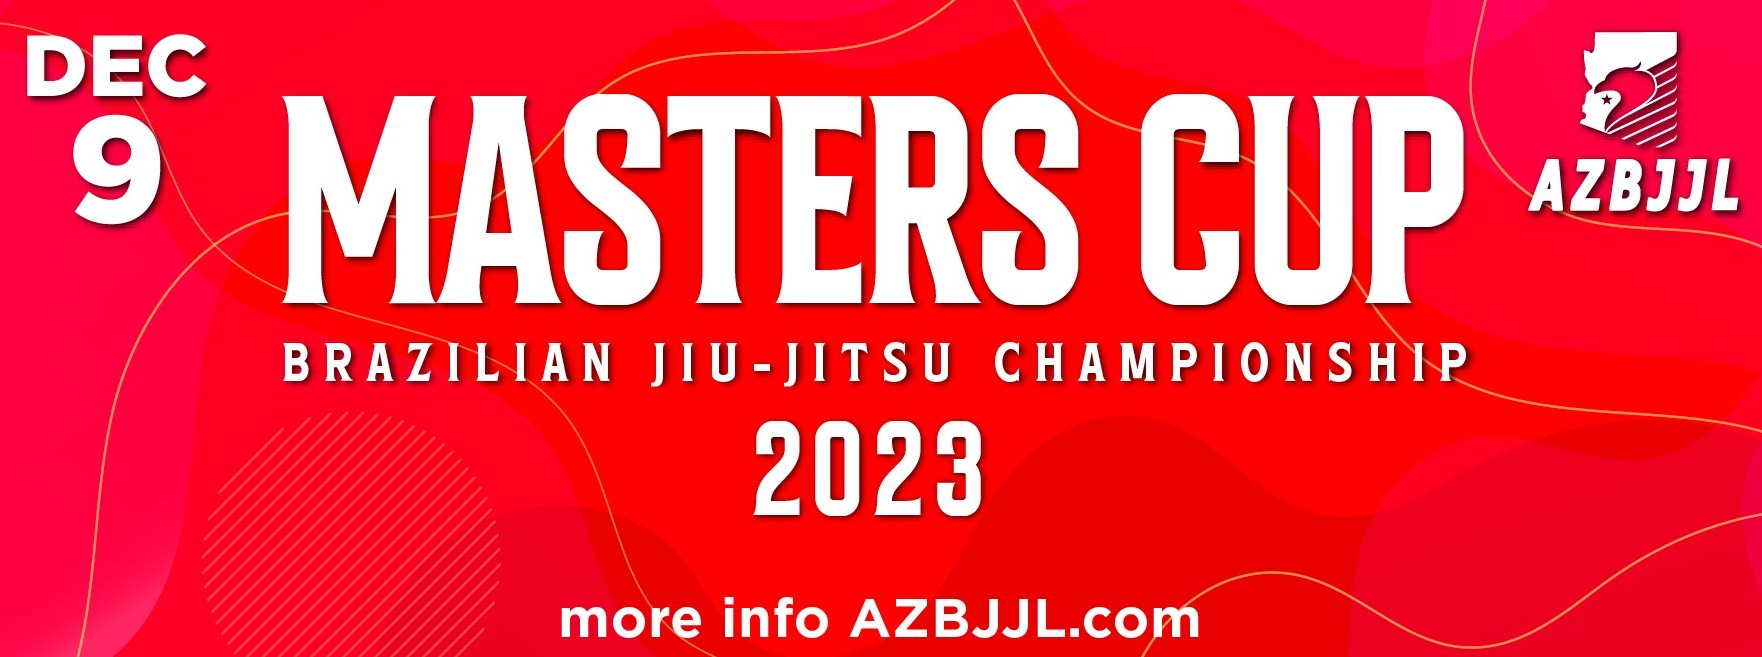 AZBJJL- 2023 Masters Cup - Smoothcomp